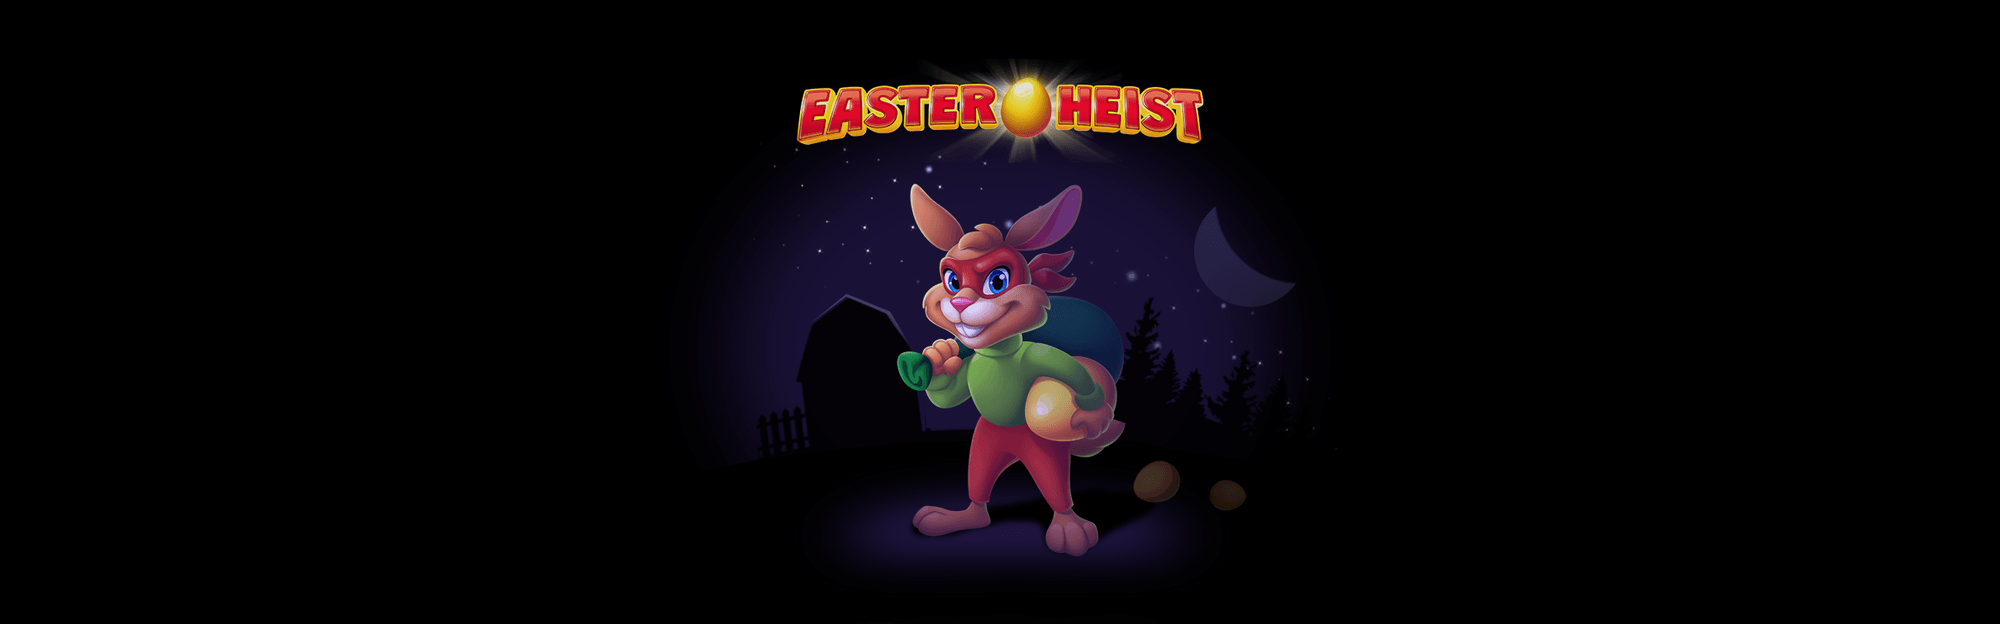 Cracking the Easter Heist: A Review of This Exciting Slot Game